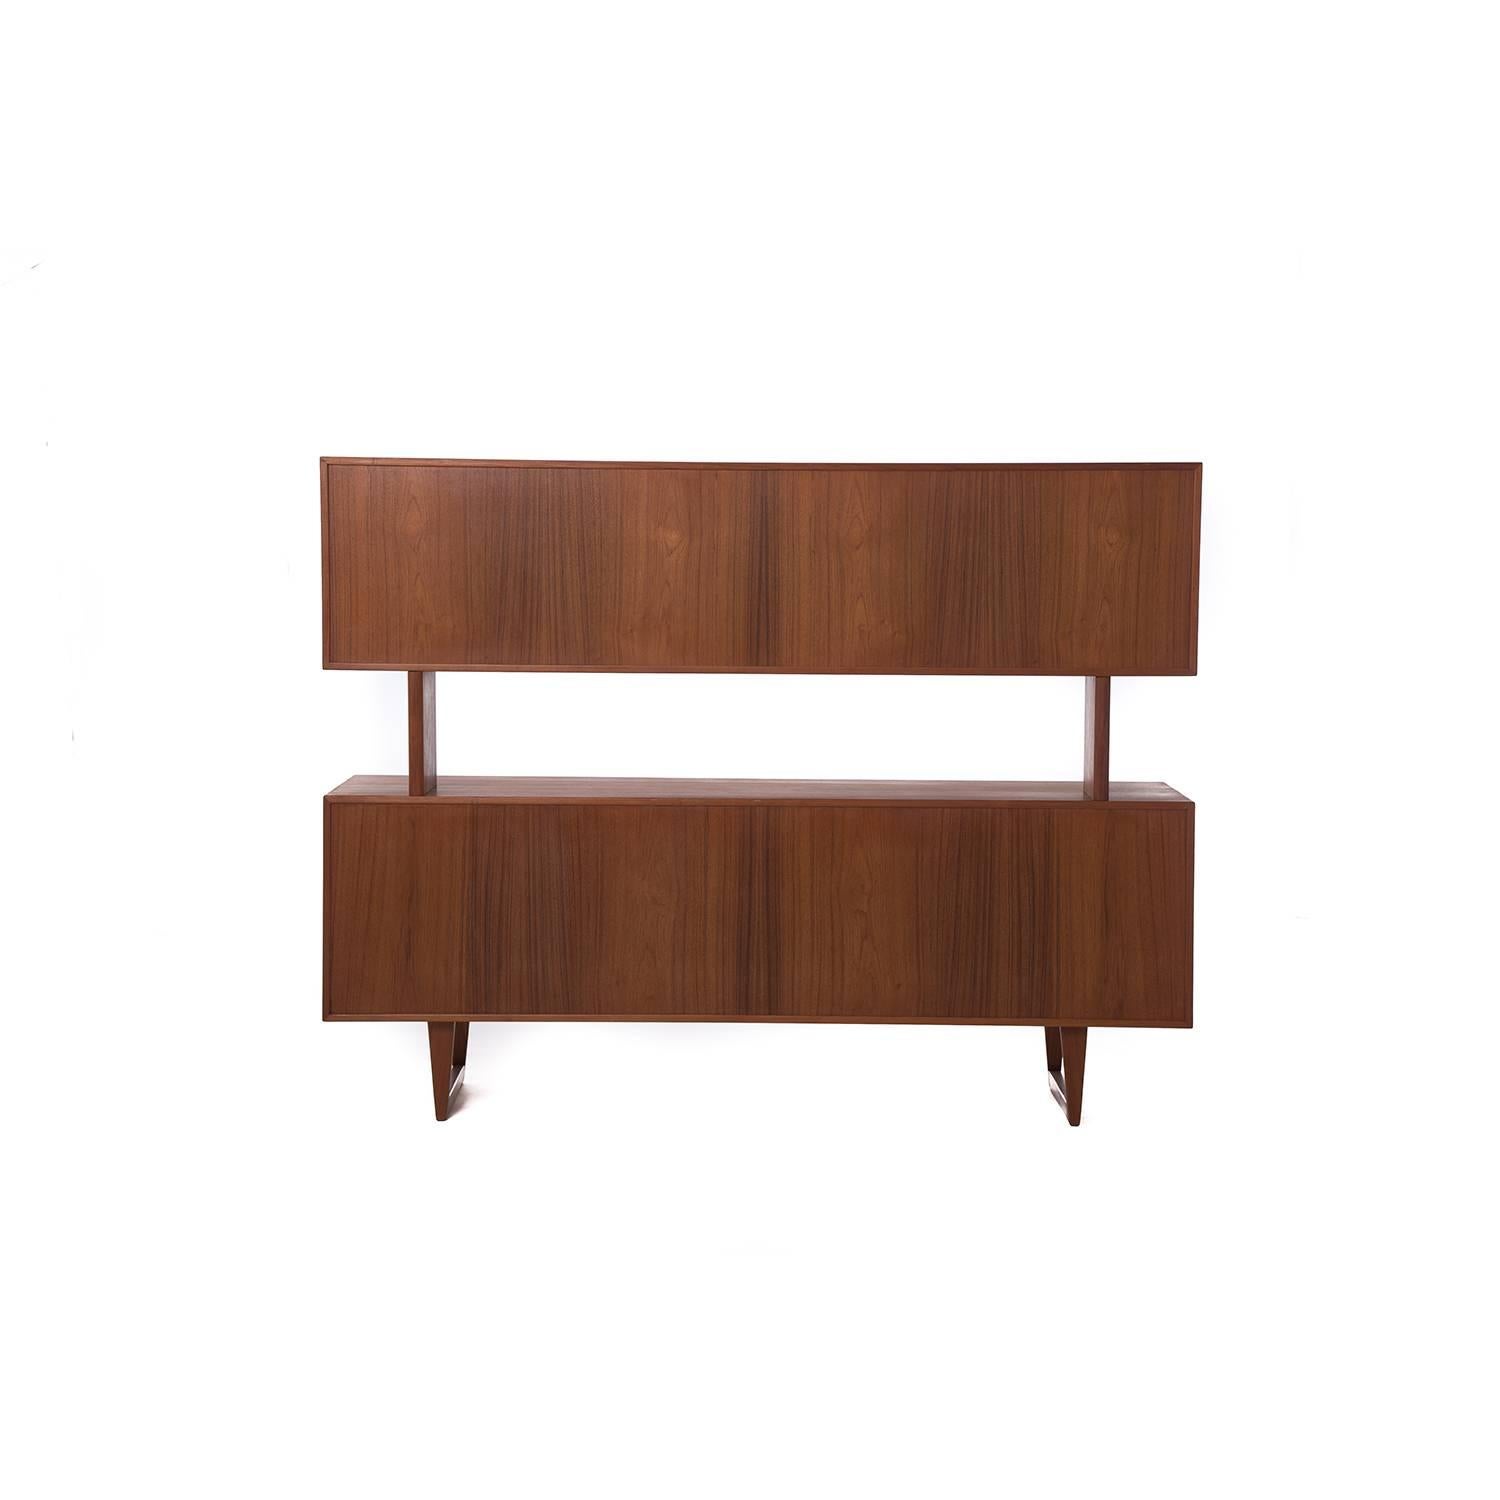 This Kurt Ostervig teak sideboard with sleigh legs features lower storage with a series of drawers and doors and a detachable upper shelving component with sliding glass doors.